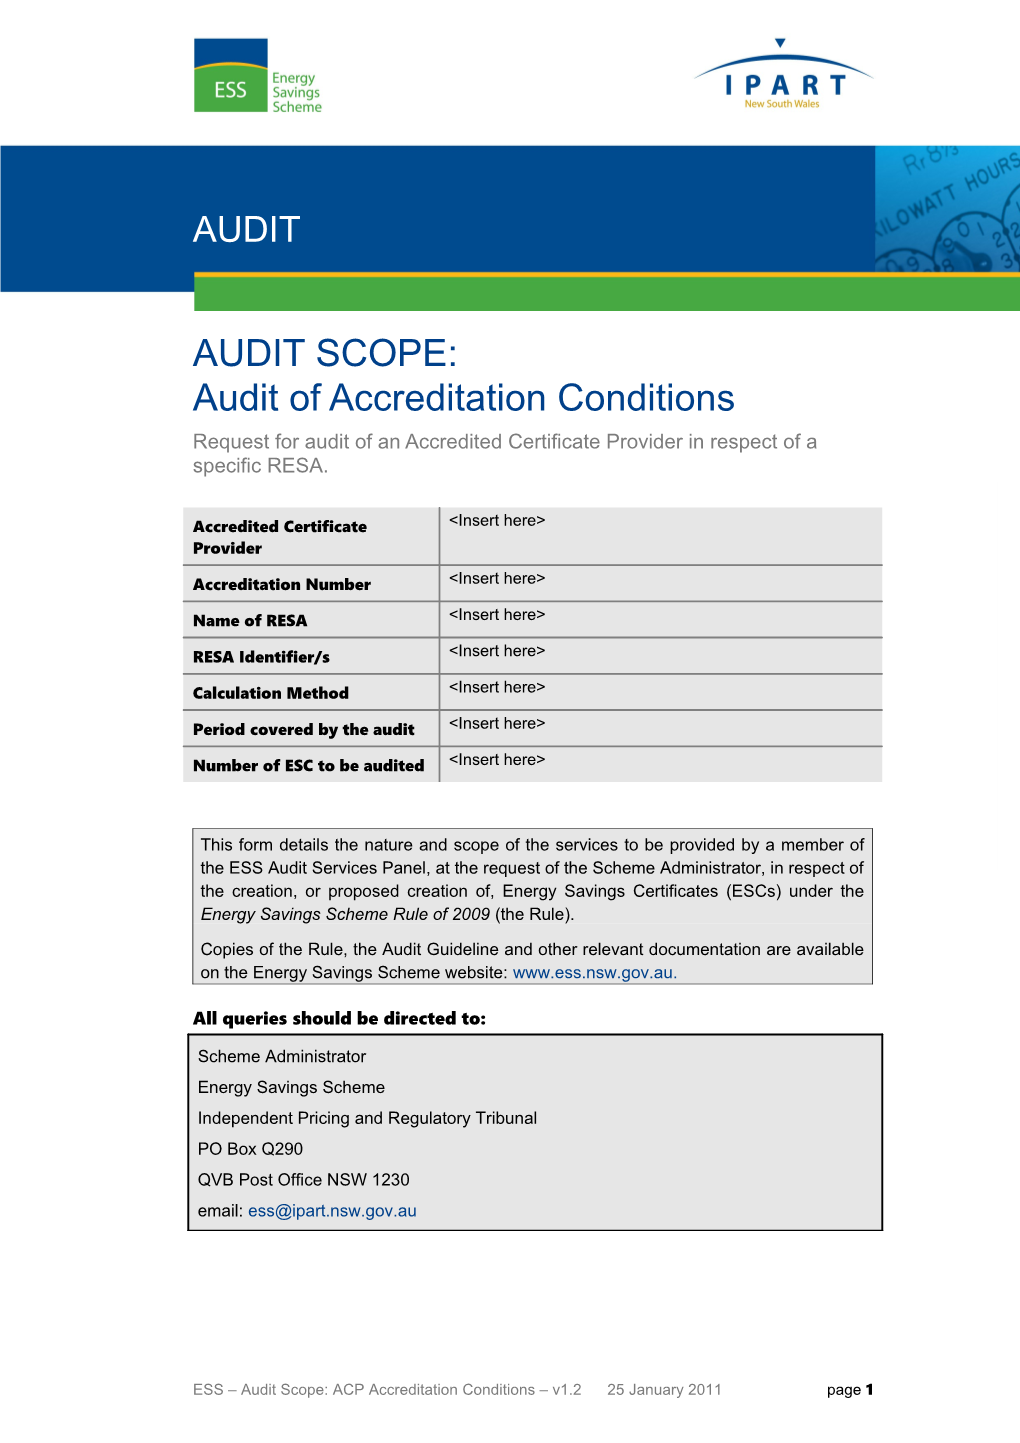 Request for Auditof an Accredited Certificate Provider in Respect of a Specific RESA